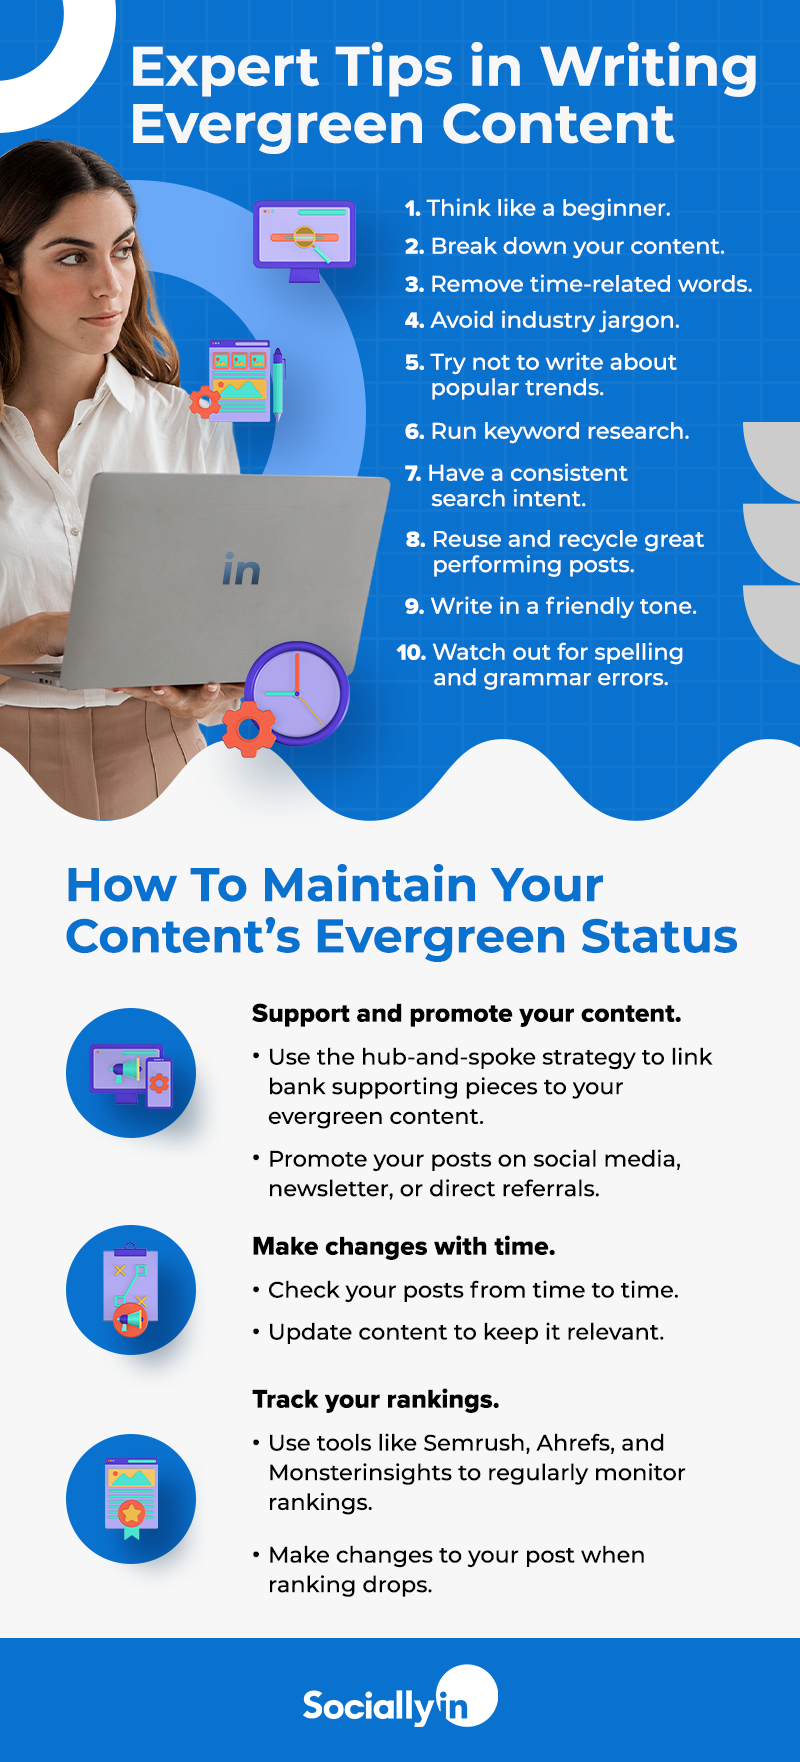 What Is Evergreen Content And How to Maintain Evergreen Content Status